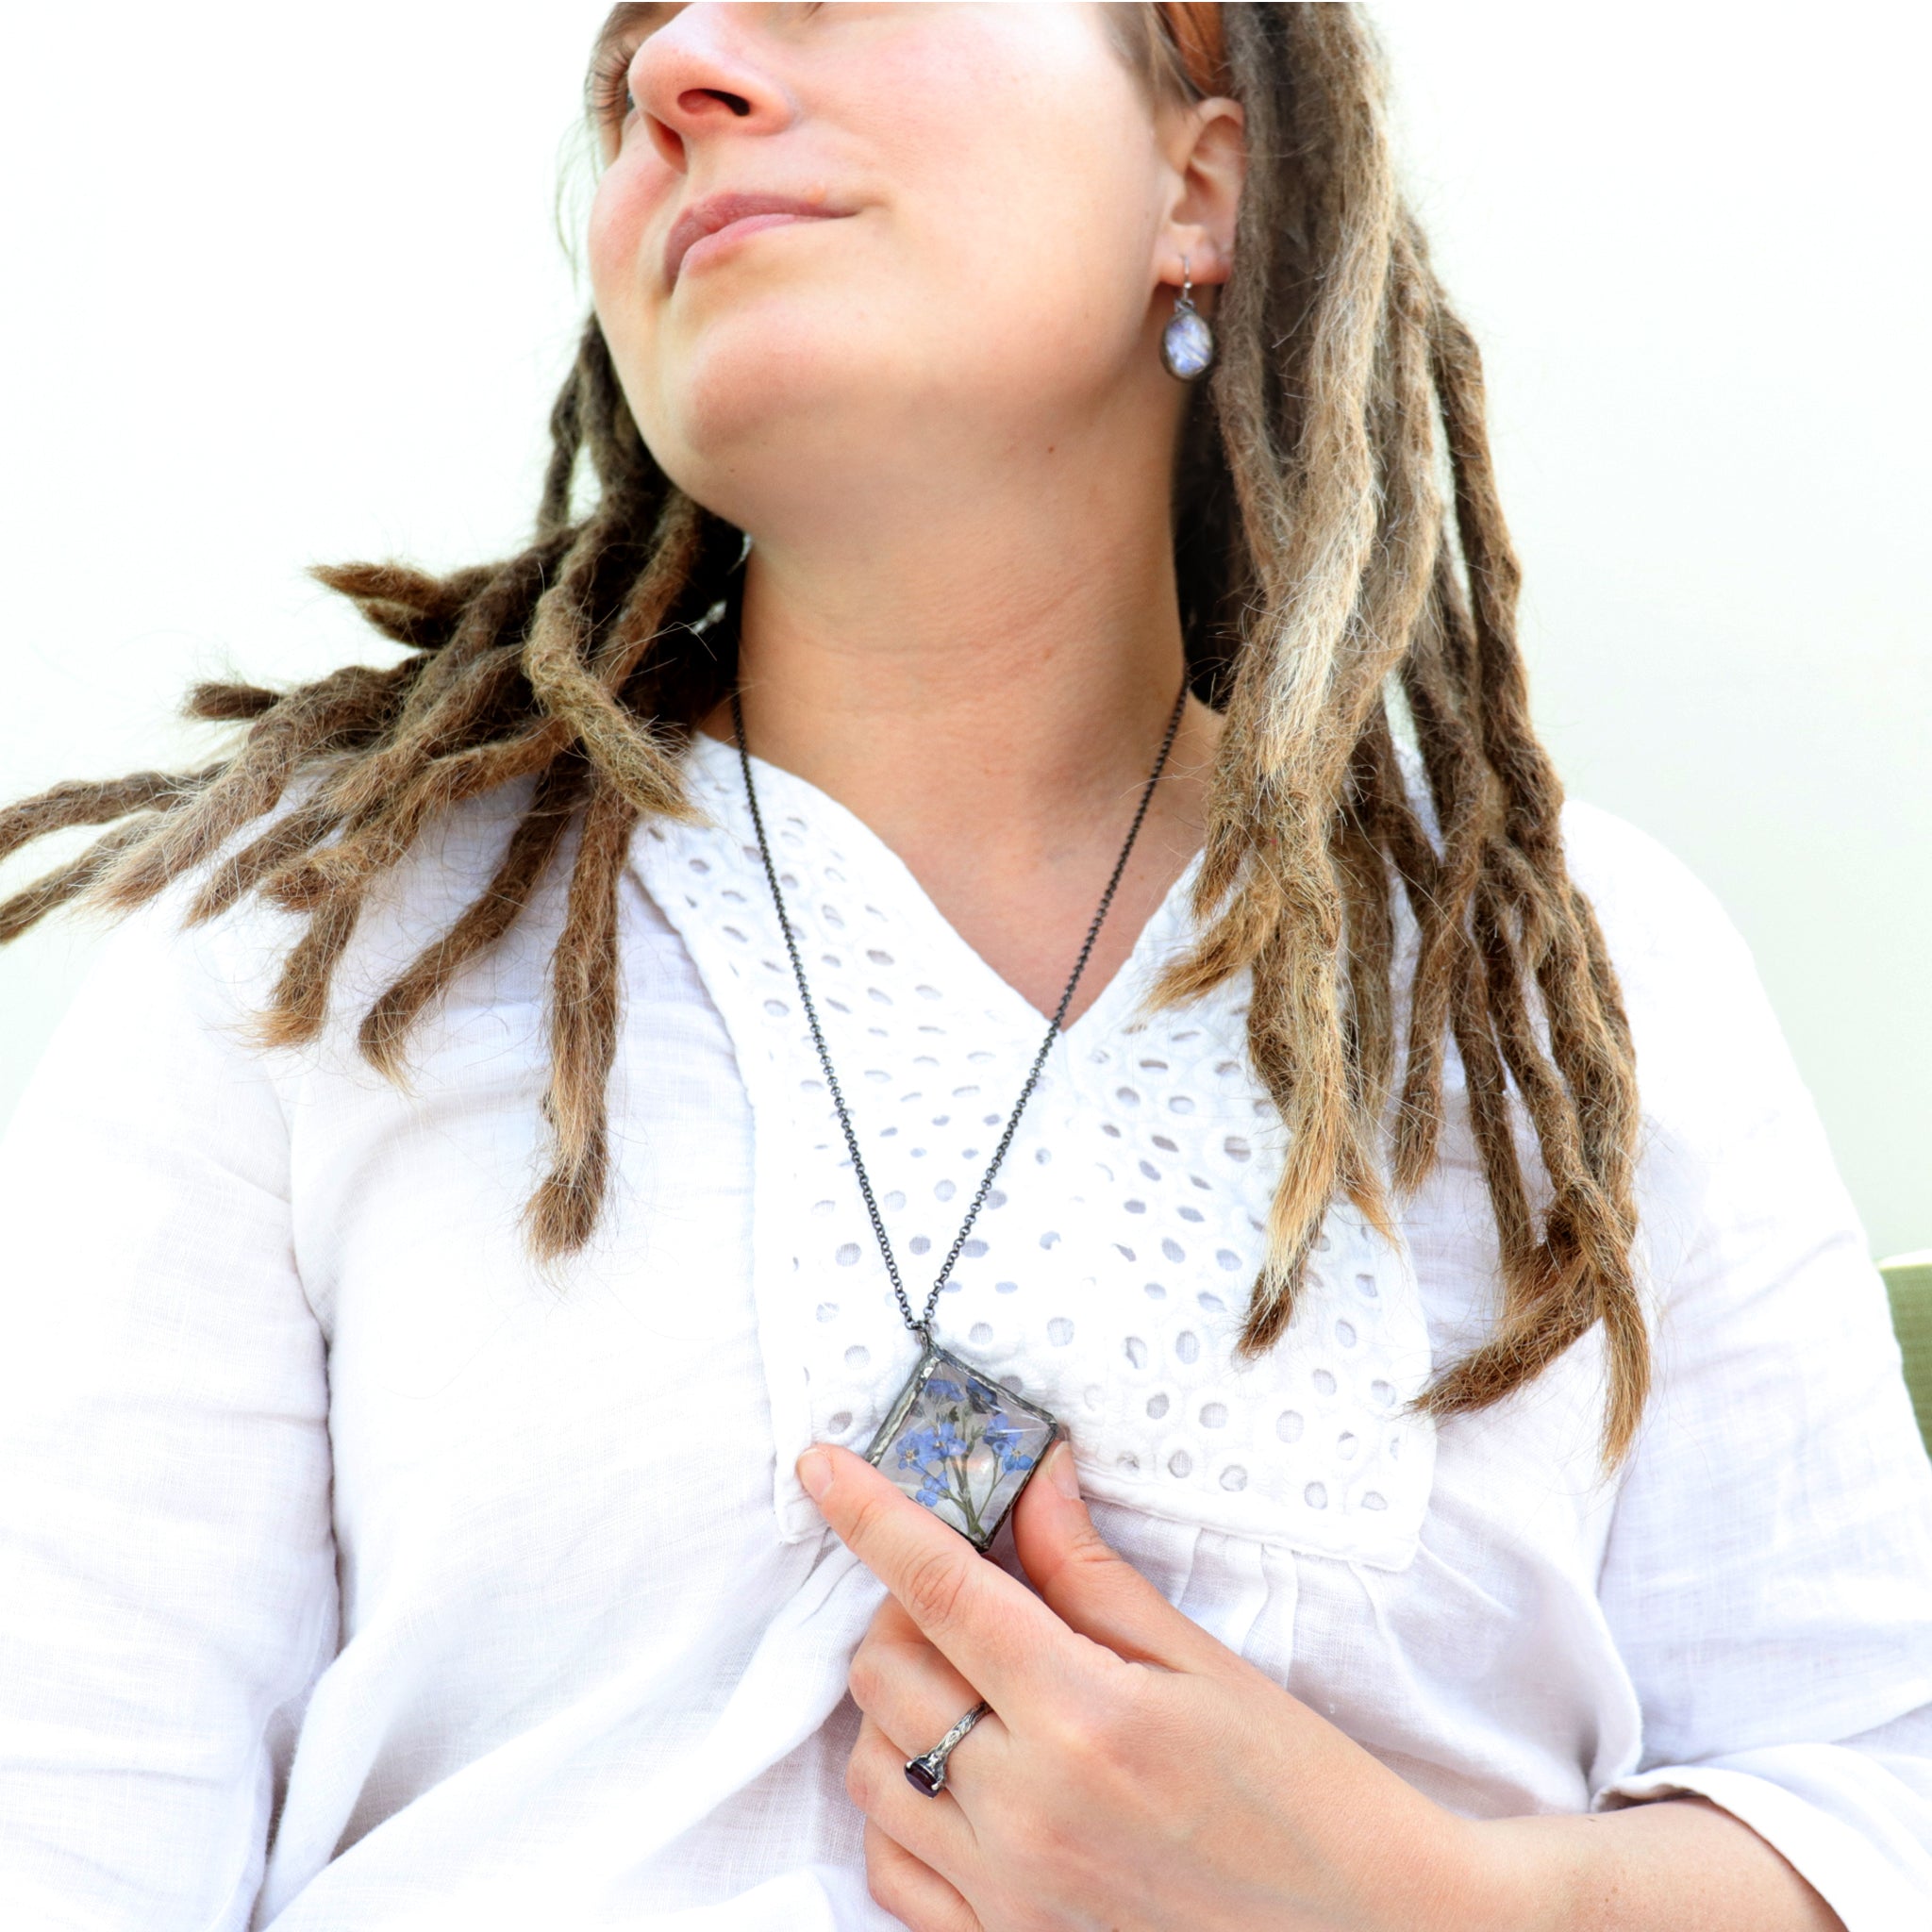 woman with dreadlock in a white blouse wearing and holding a diamond shaped necklace in her hand